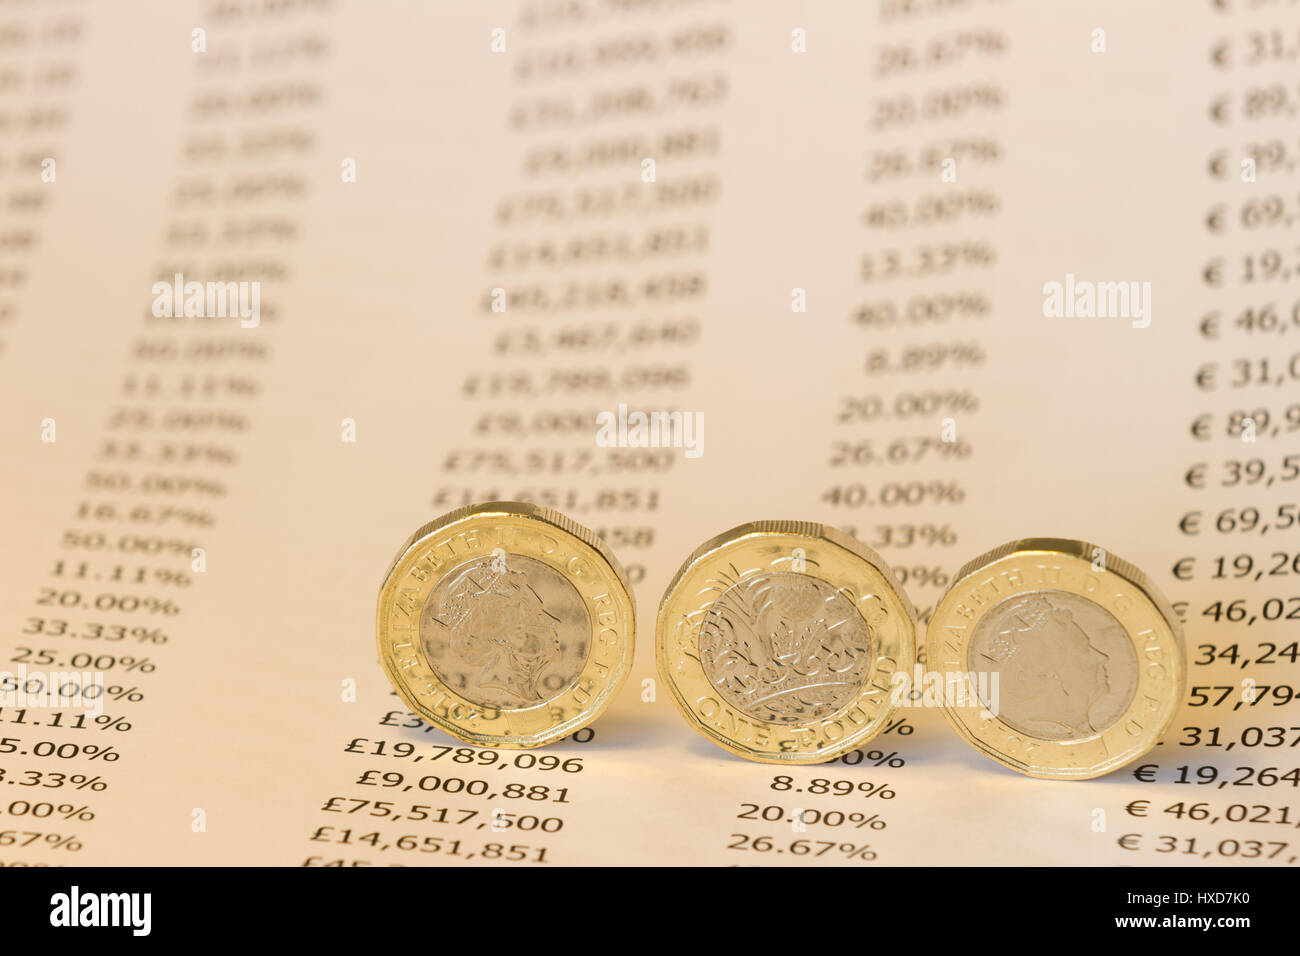 Newcastle upon Tyne, England, UK. Tuesday, 28 March, 2017. New British pound coin is issued. Credit: Andrew Nicholson/Alamy Live News Stock Photo